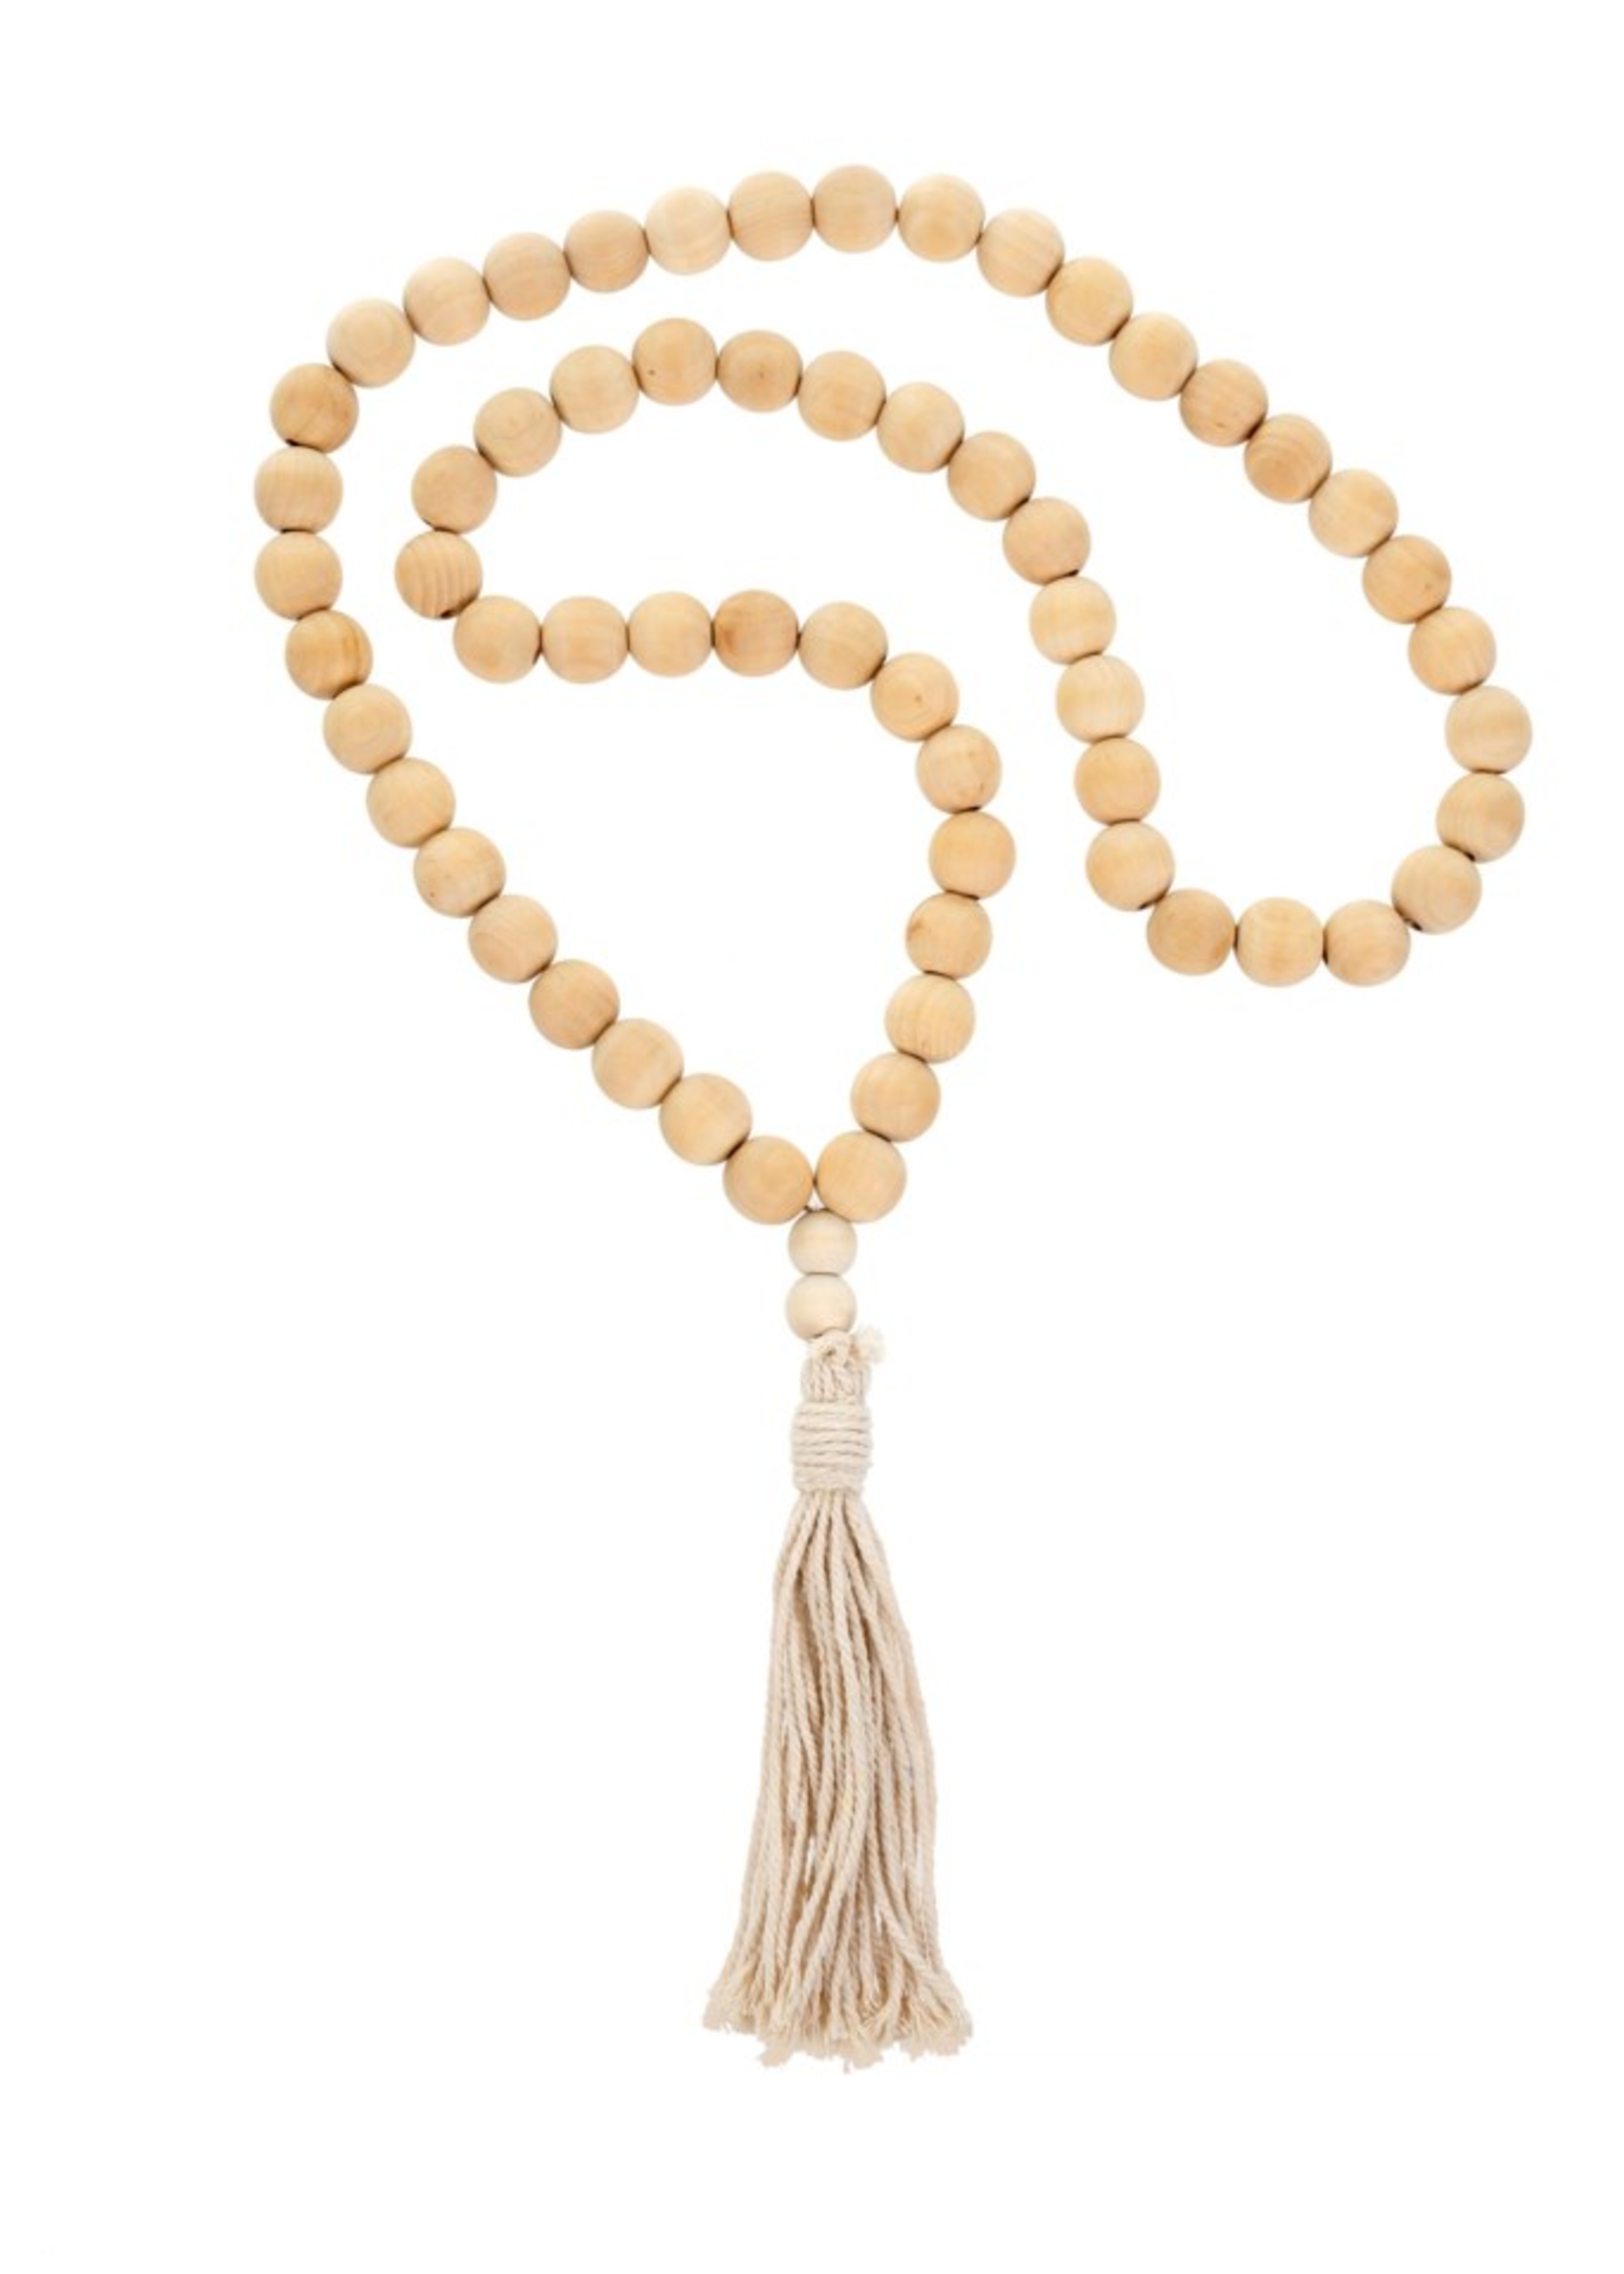 Indaba Trading Co 60% OFF Tassel Blessing Beads - Natural